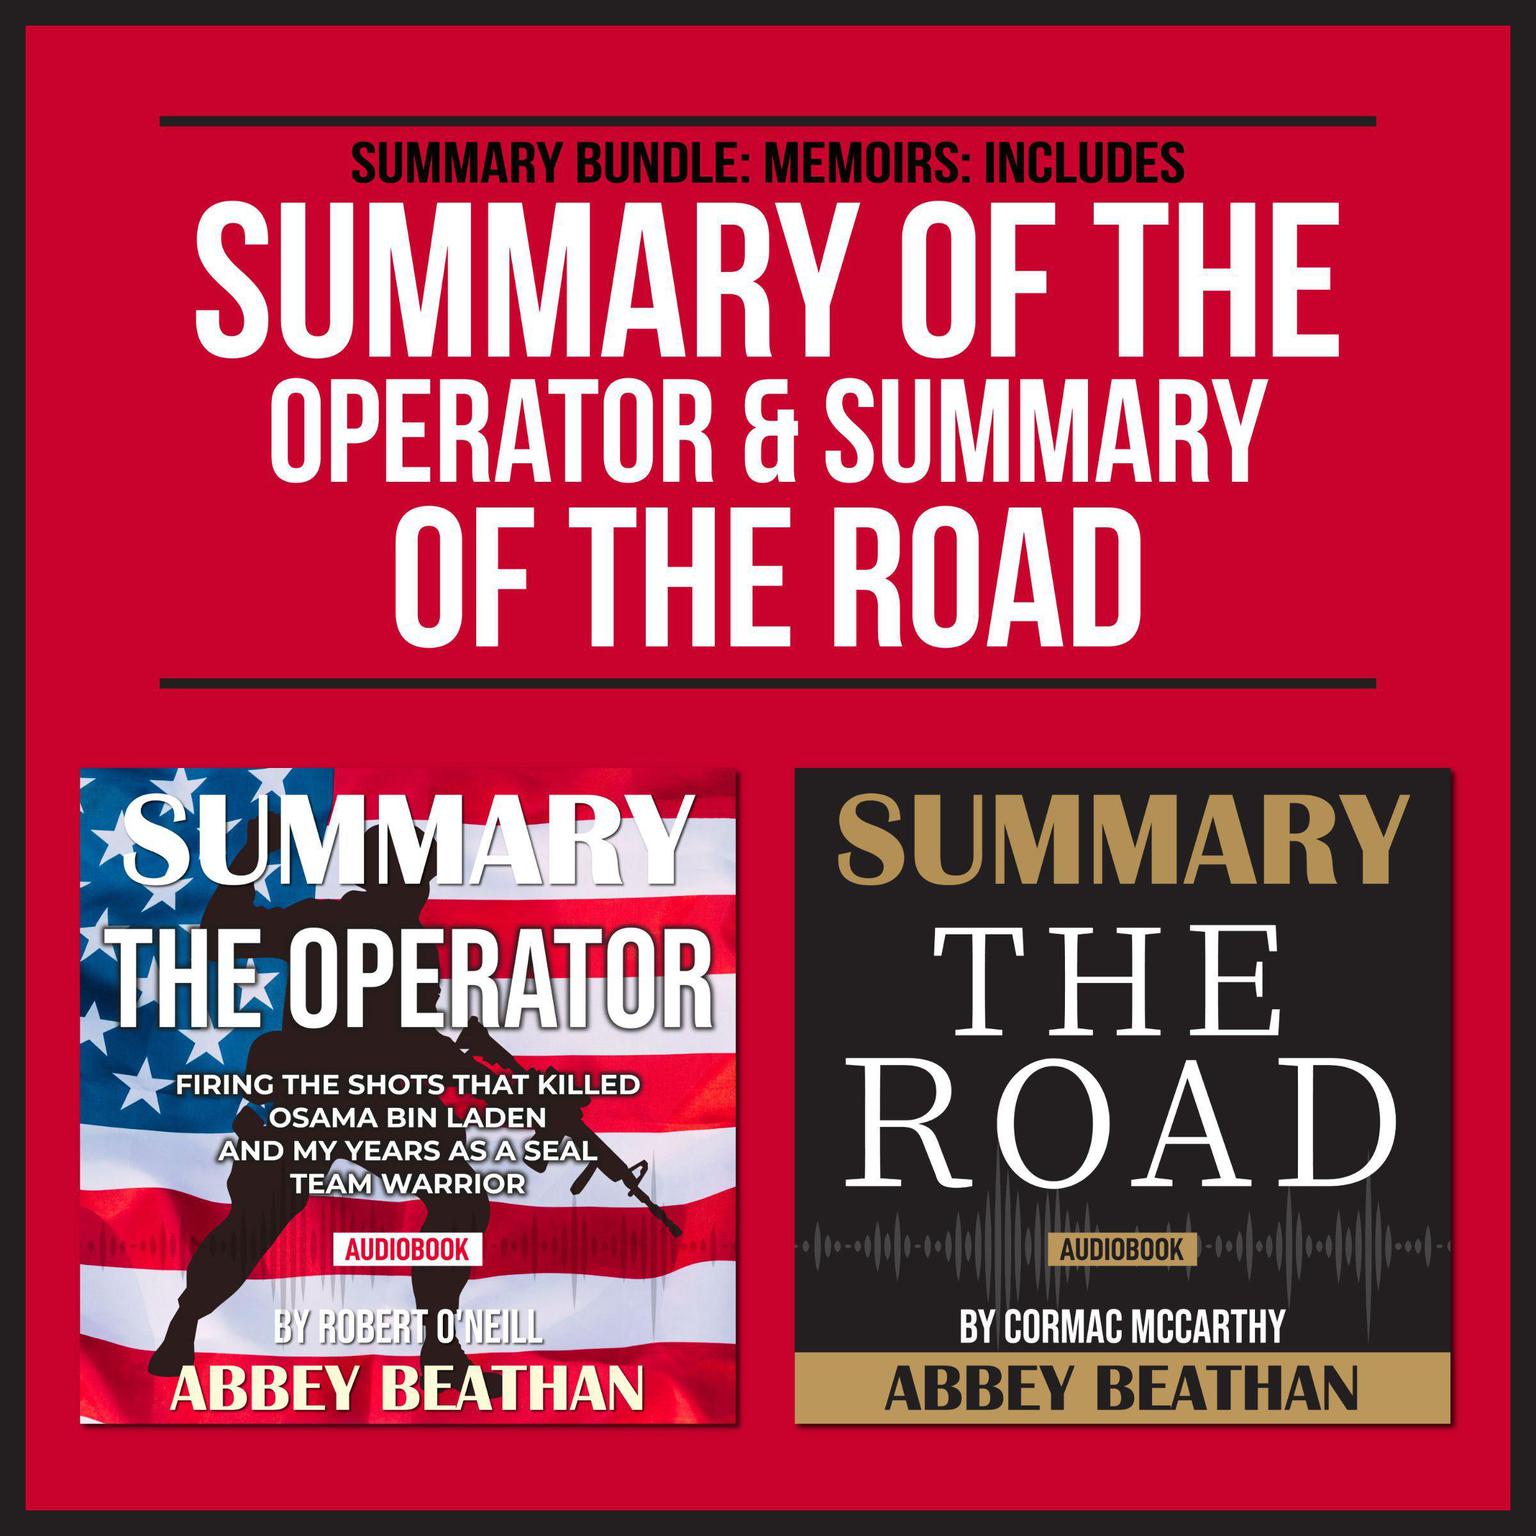 Summary Bundle: Memoirs: Includes Summary of The Operator & Summary of The Road Audiobook, by Abbey Beathan